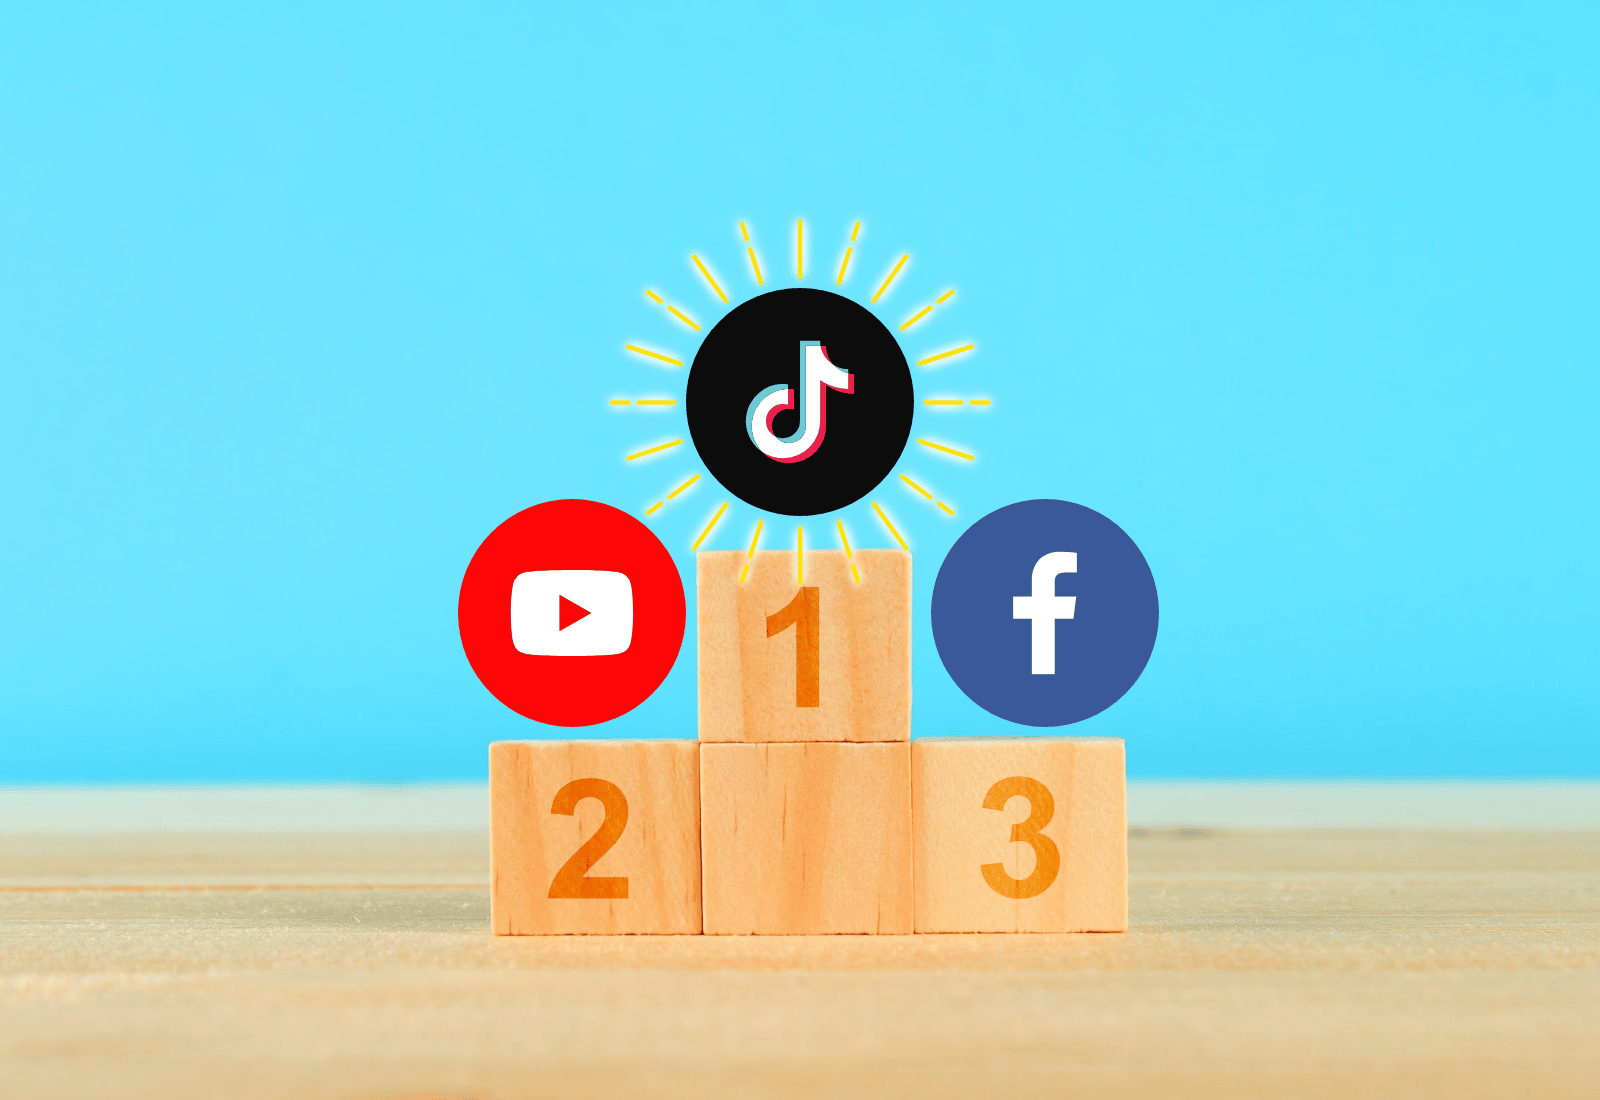 podium made of blocks showing TikTok in first place, Youtube in second place, Facebook in third place